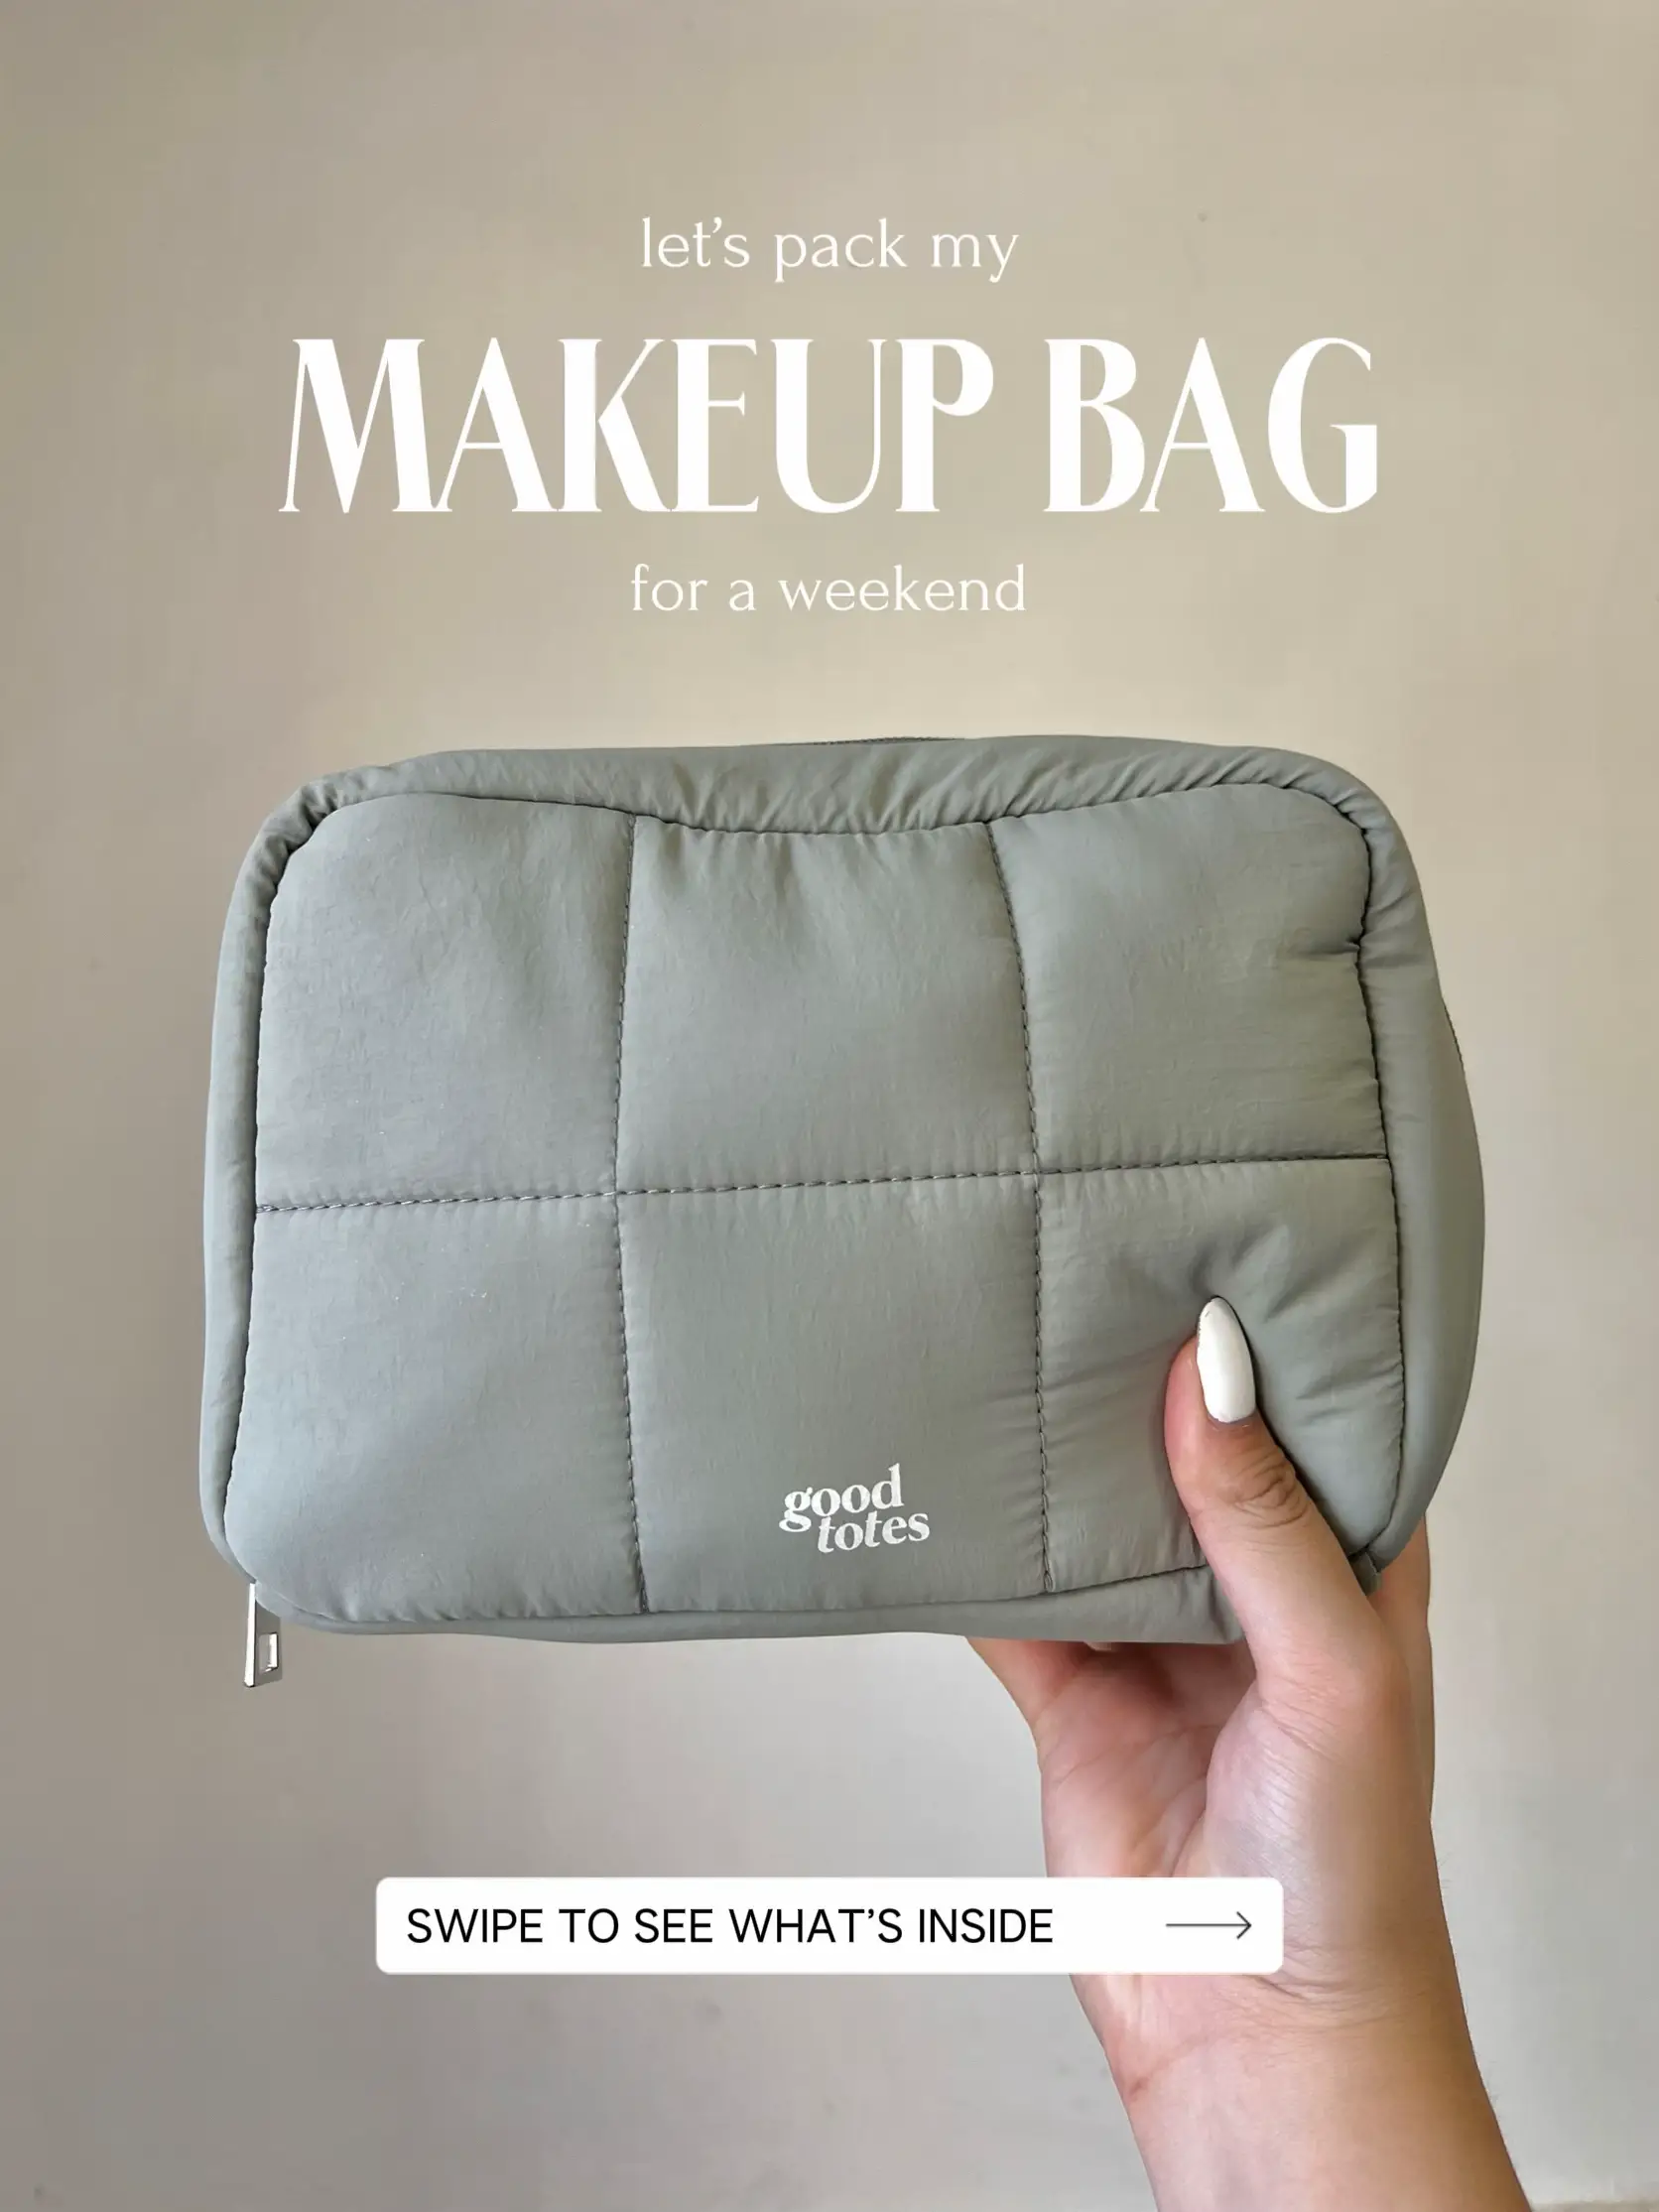 let's pack my makeup bag for the weekend 💄